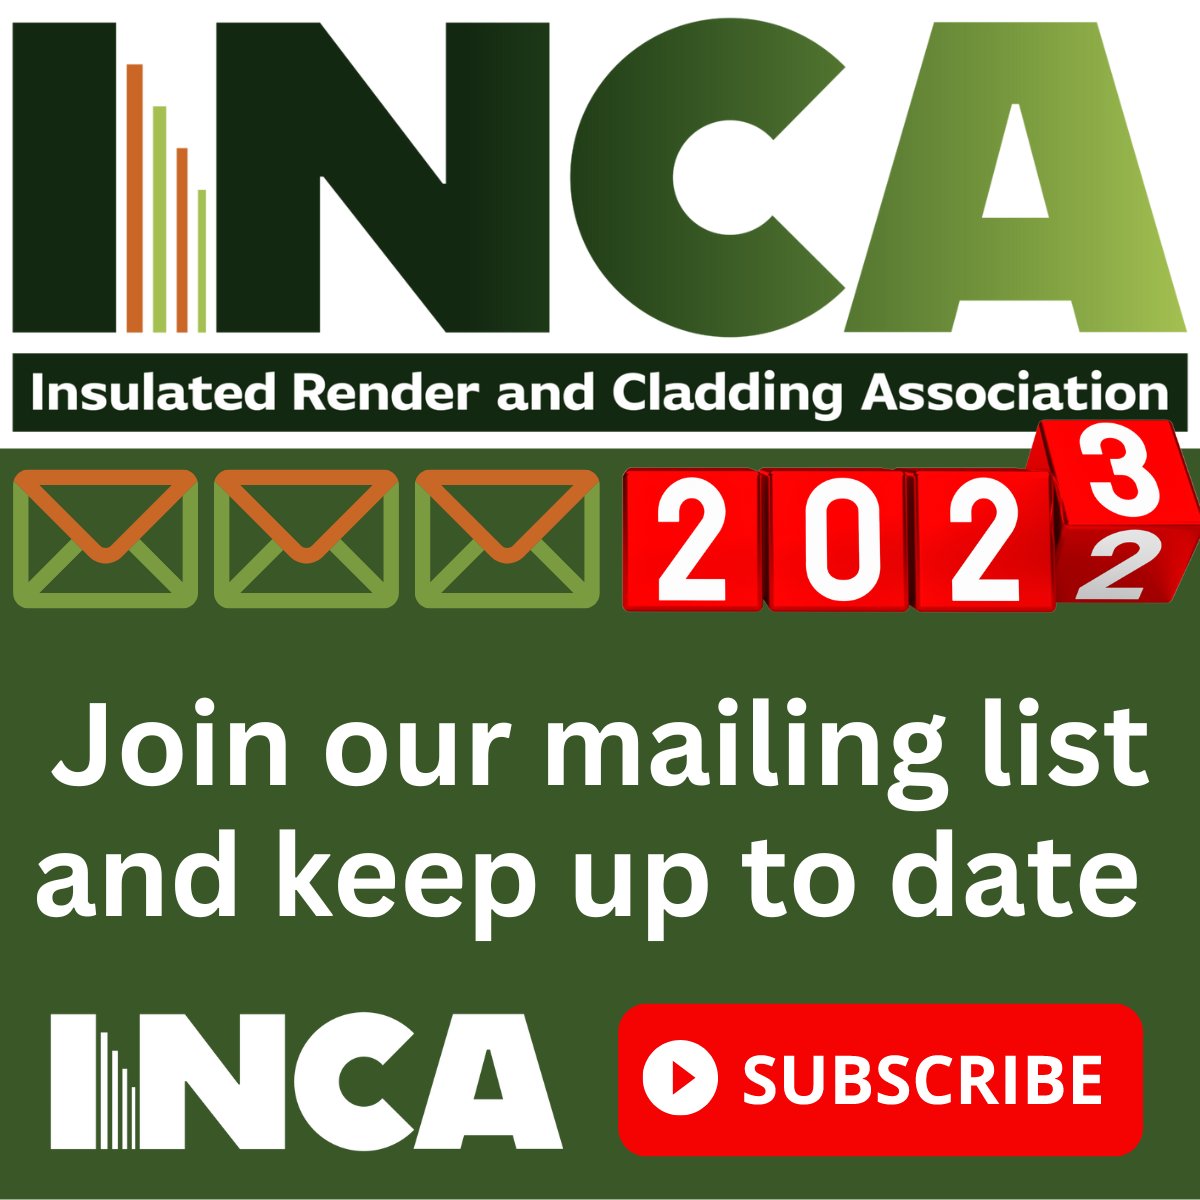 The new year brings exciting new plans and initiatives as we look to develop the association further. The first weekly newsletter of the year on Thursday will outline what you can expect from INCA in 2023. Members can sign up to receive this newsletter: inca-ltd.org.uk/about-inca/sig…